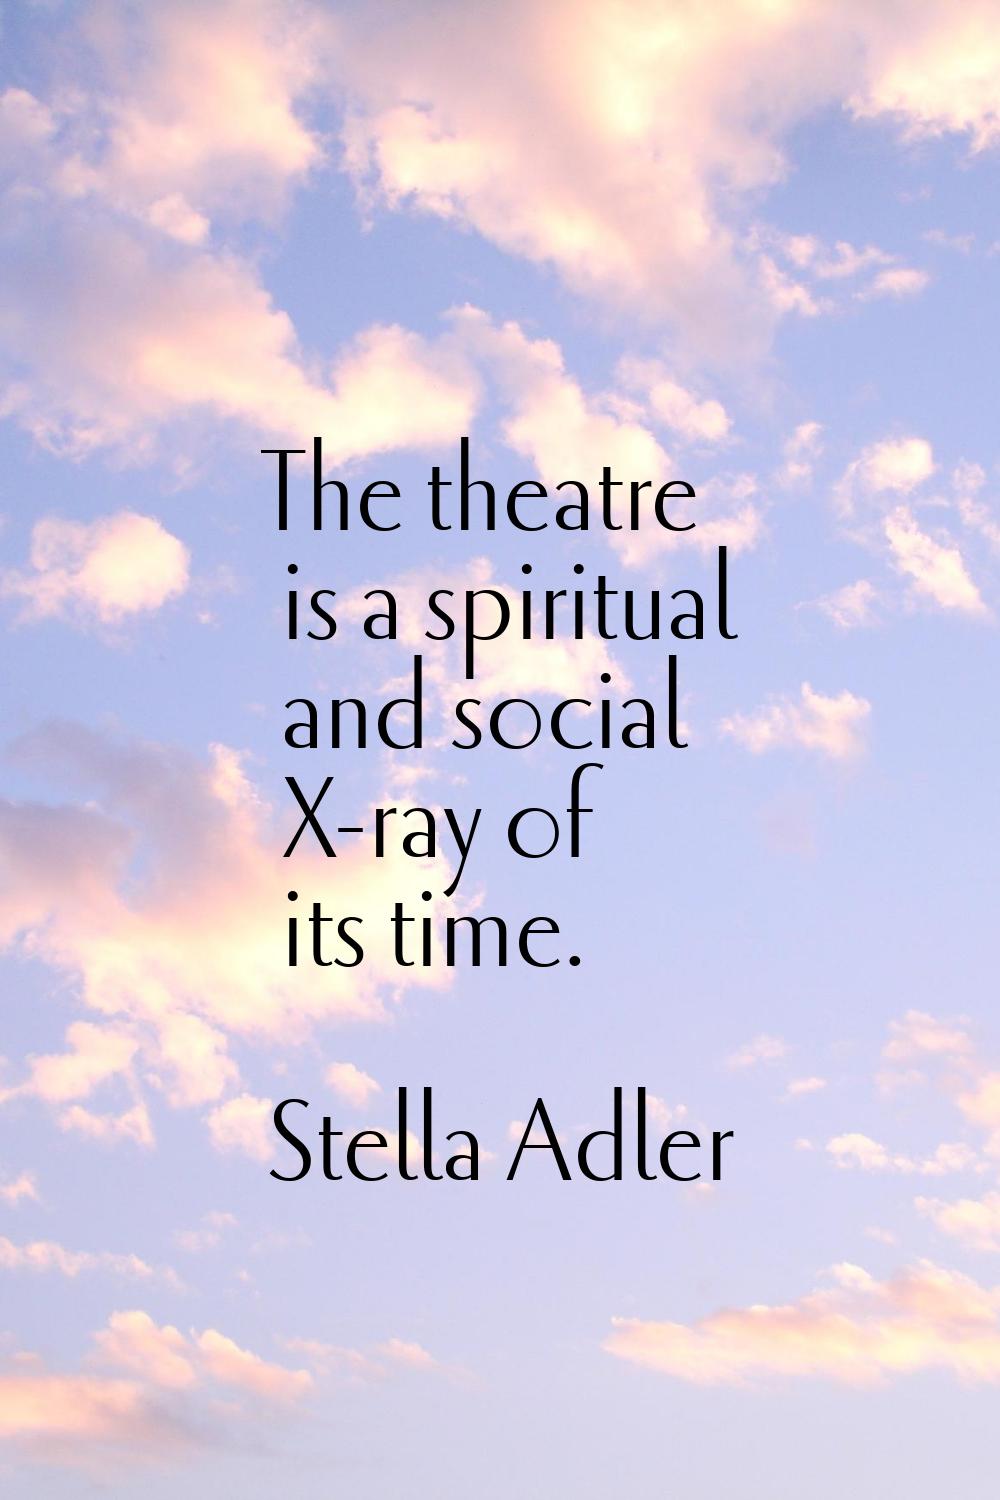 The theatre is a spiritual and social X-ray of its time.